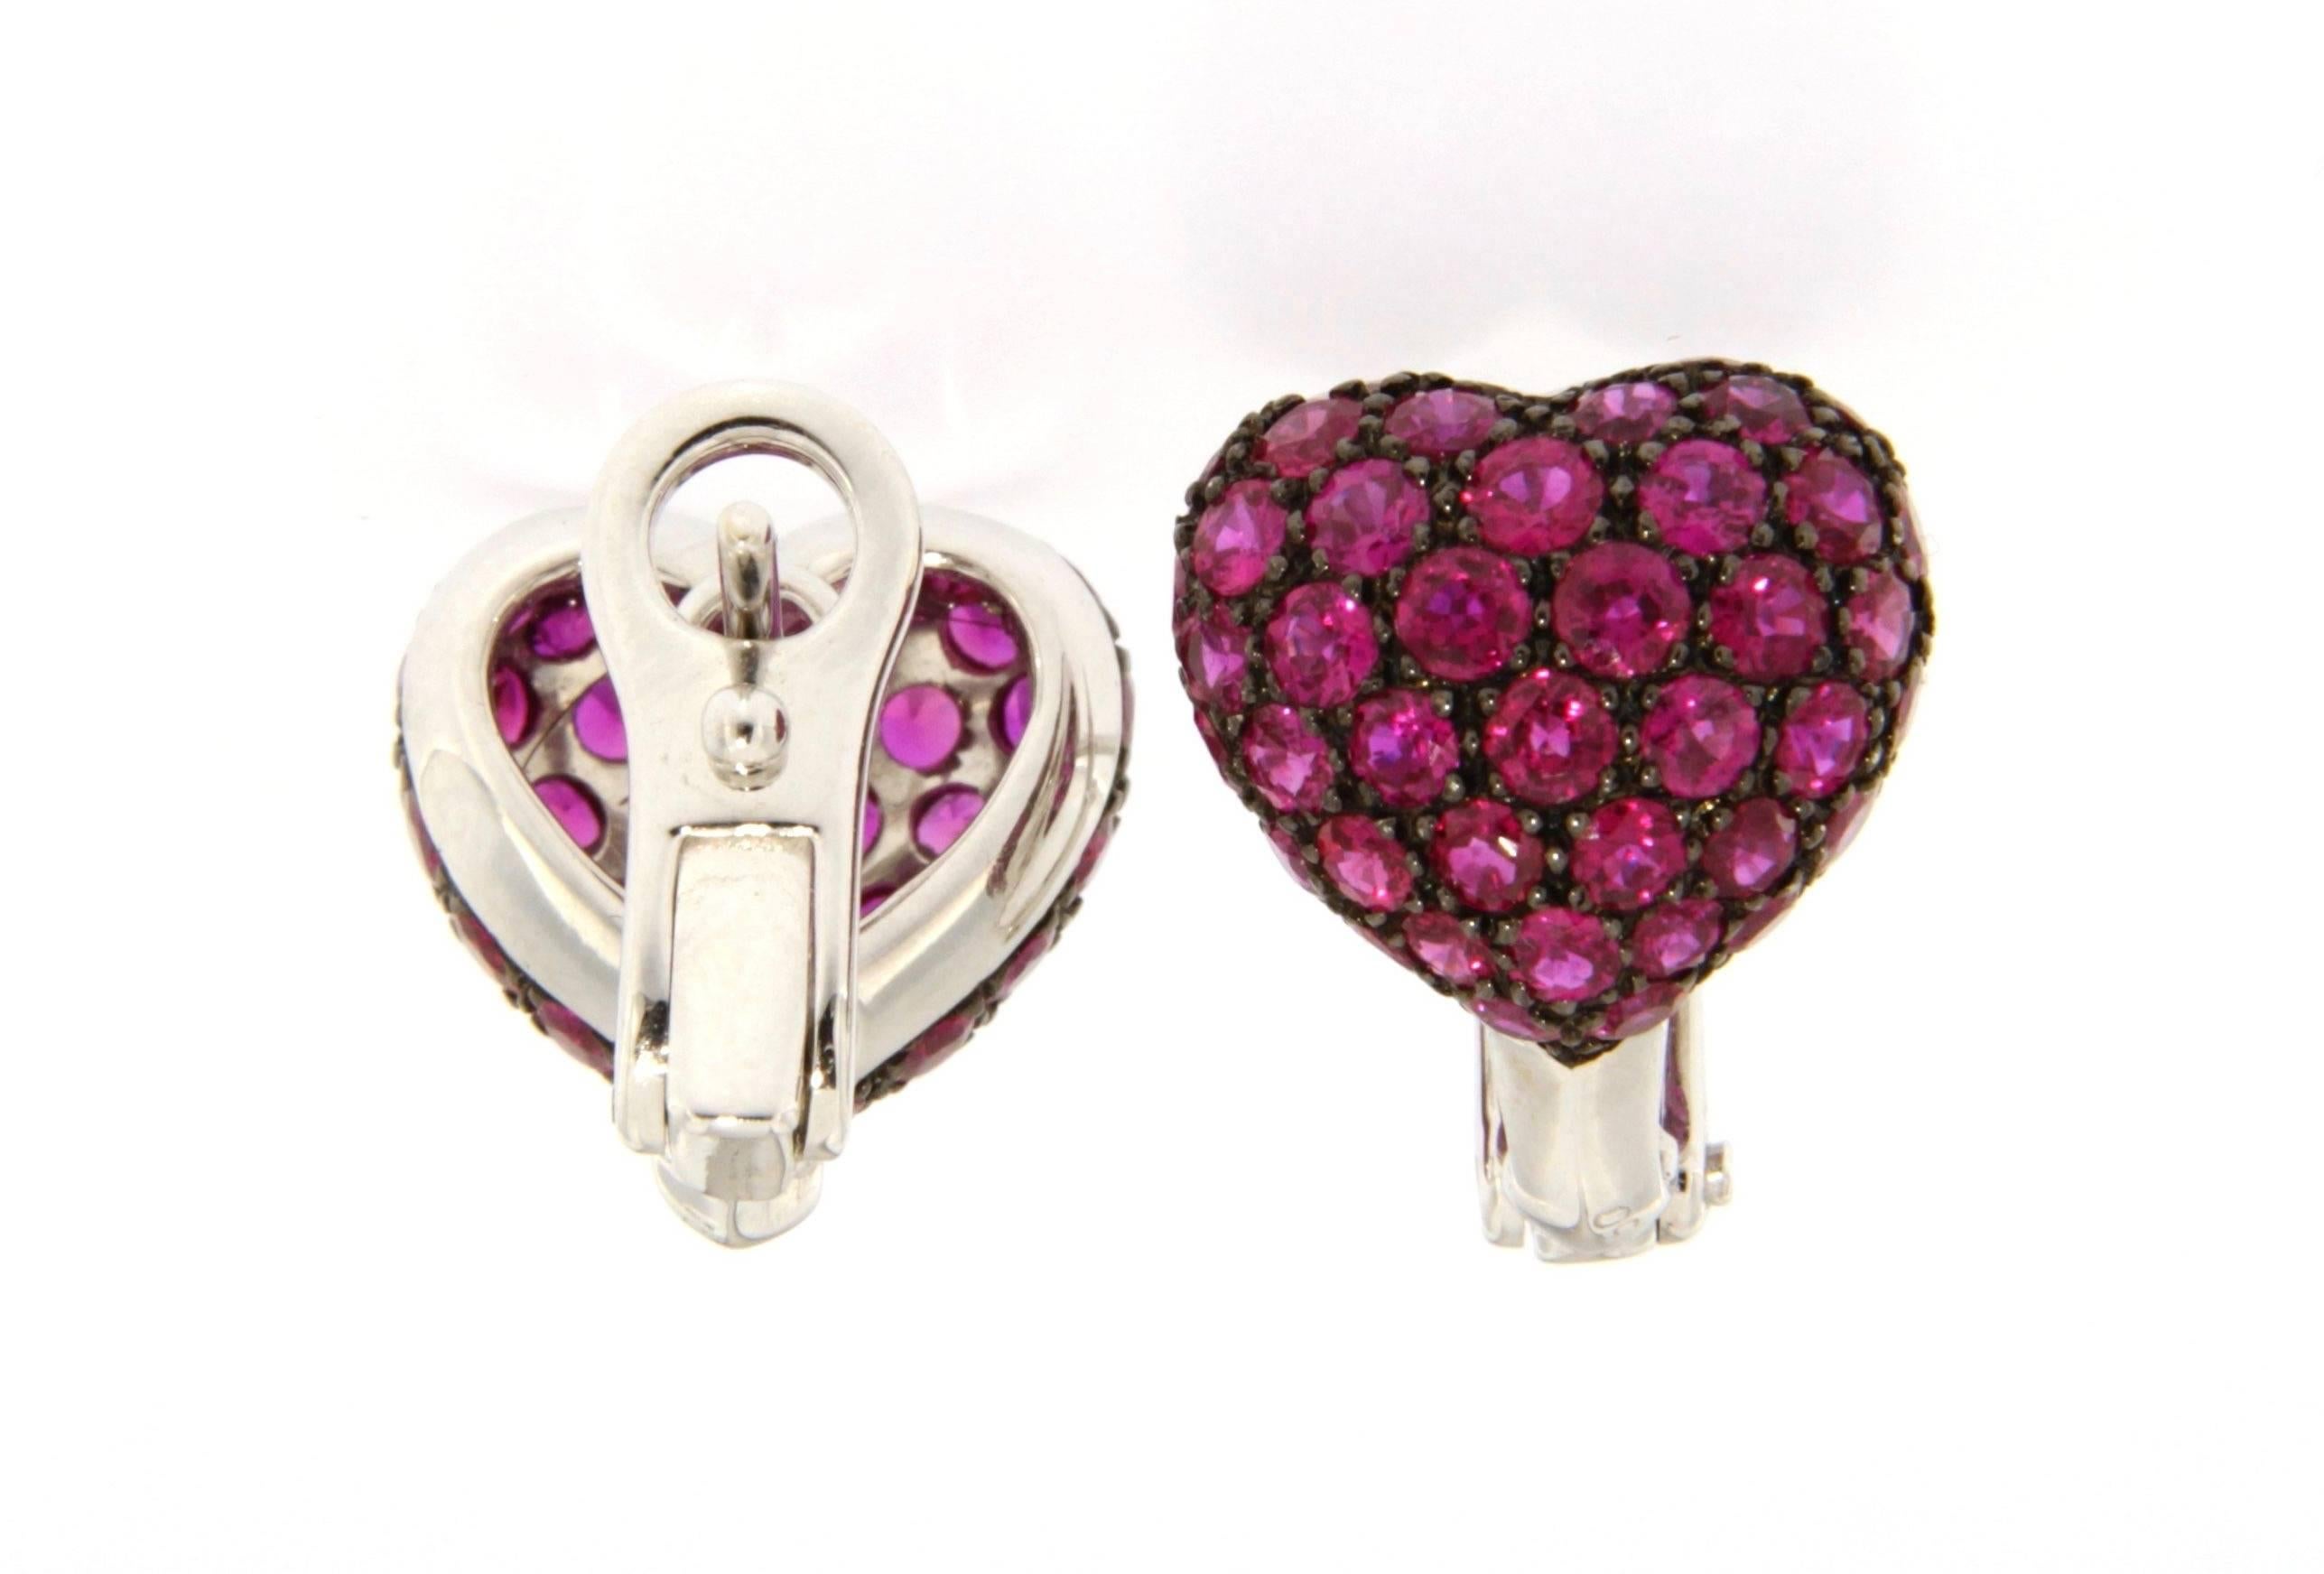 Jona design collection, hand crafted in Italy, 18 karat white gold, bombé heart  clip-on earrings, set with 3.53 carats of Burmese Rubies, with dark rhodium over setting.  
All Jona jewelry is new and has never been previously owned or worn. Each